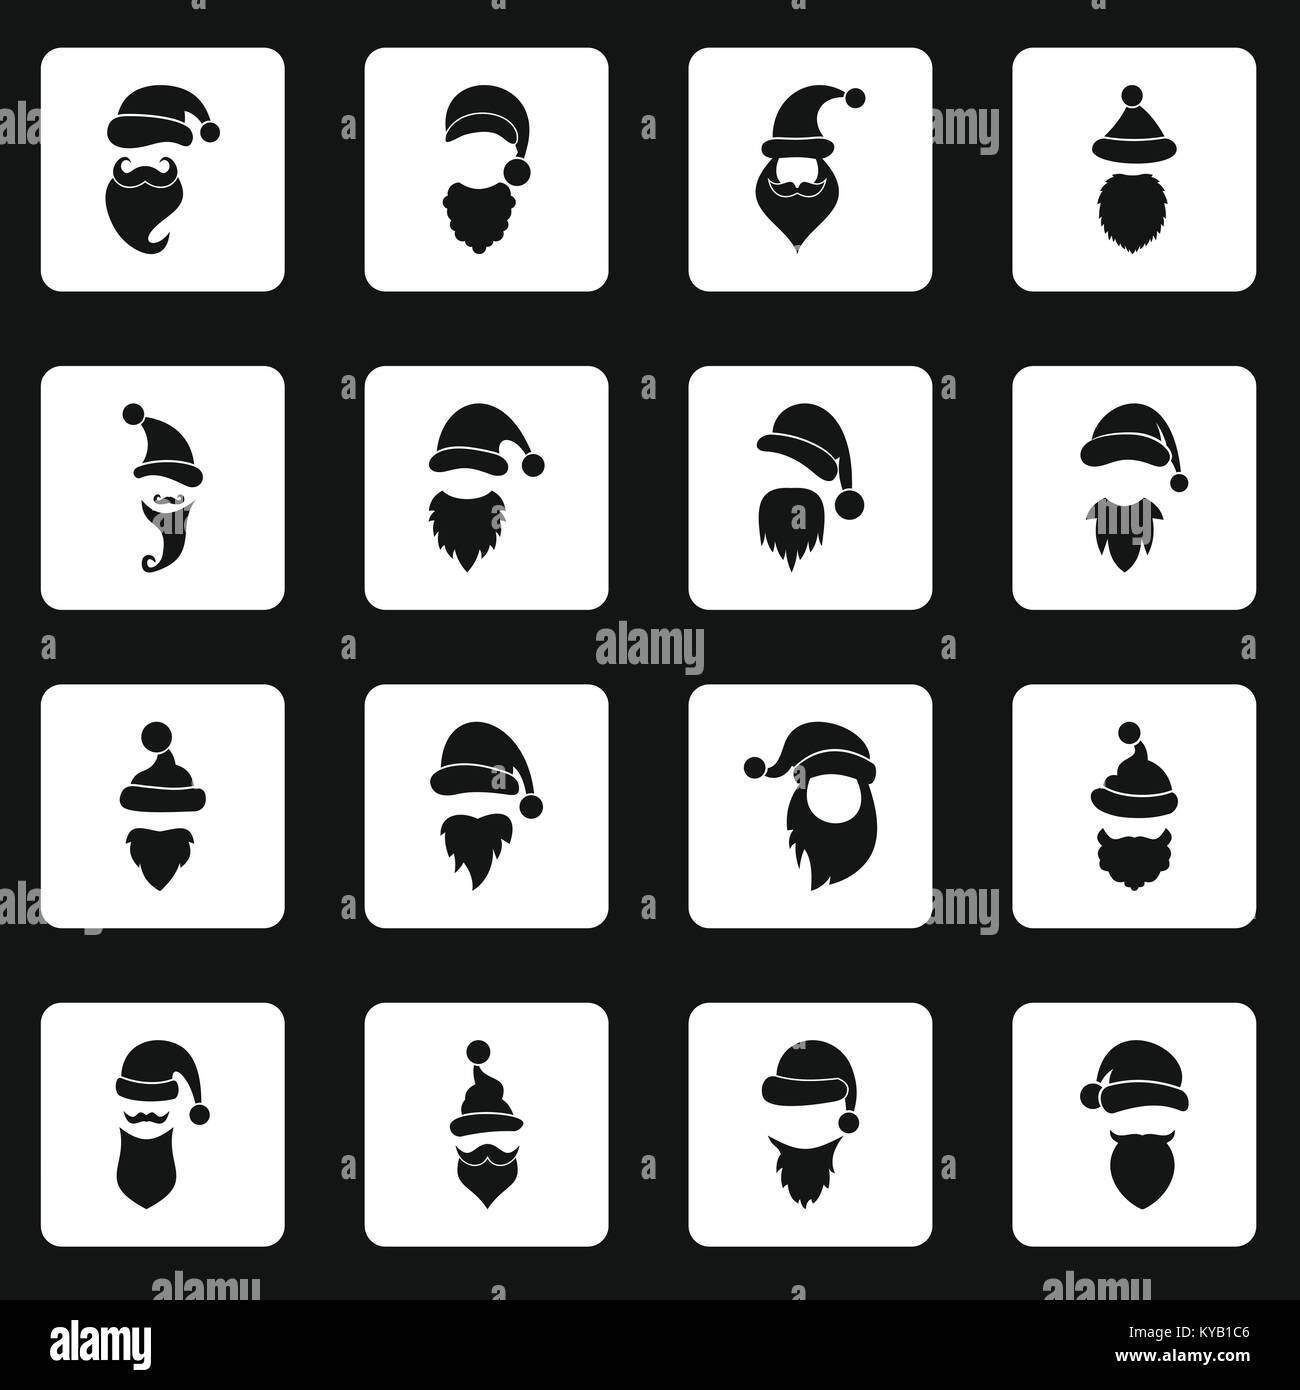 Santa hats, mustache and beards icons set in white squares on black background simple style vector illustration Stock Vector